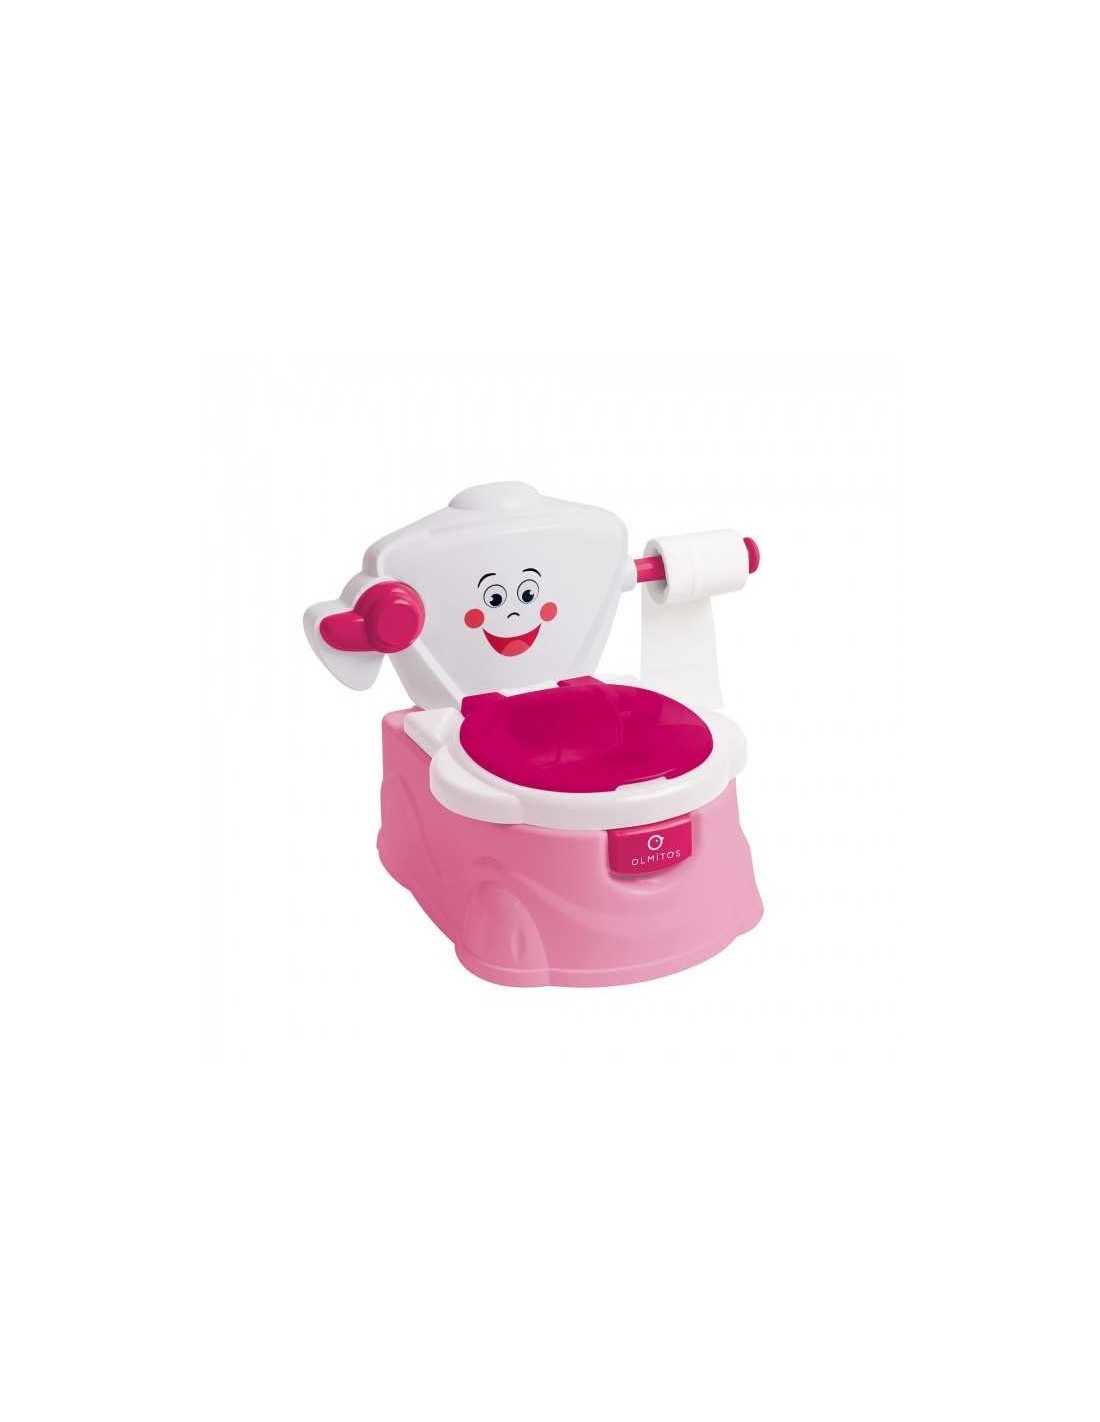 Orinal Infantil Osito Rosa - Outlet Exclusivo